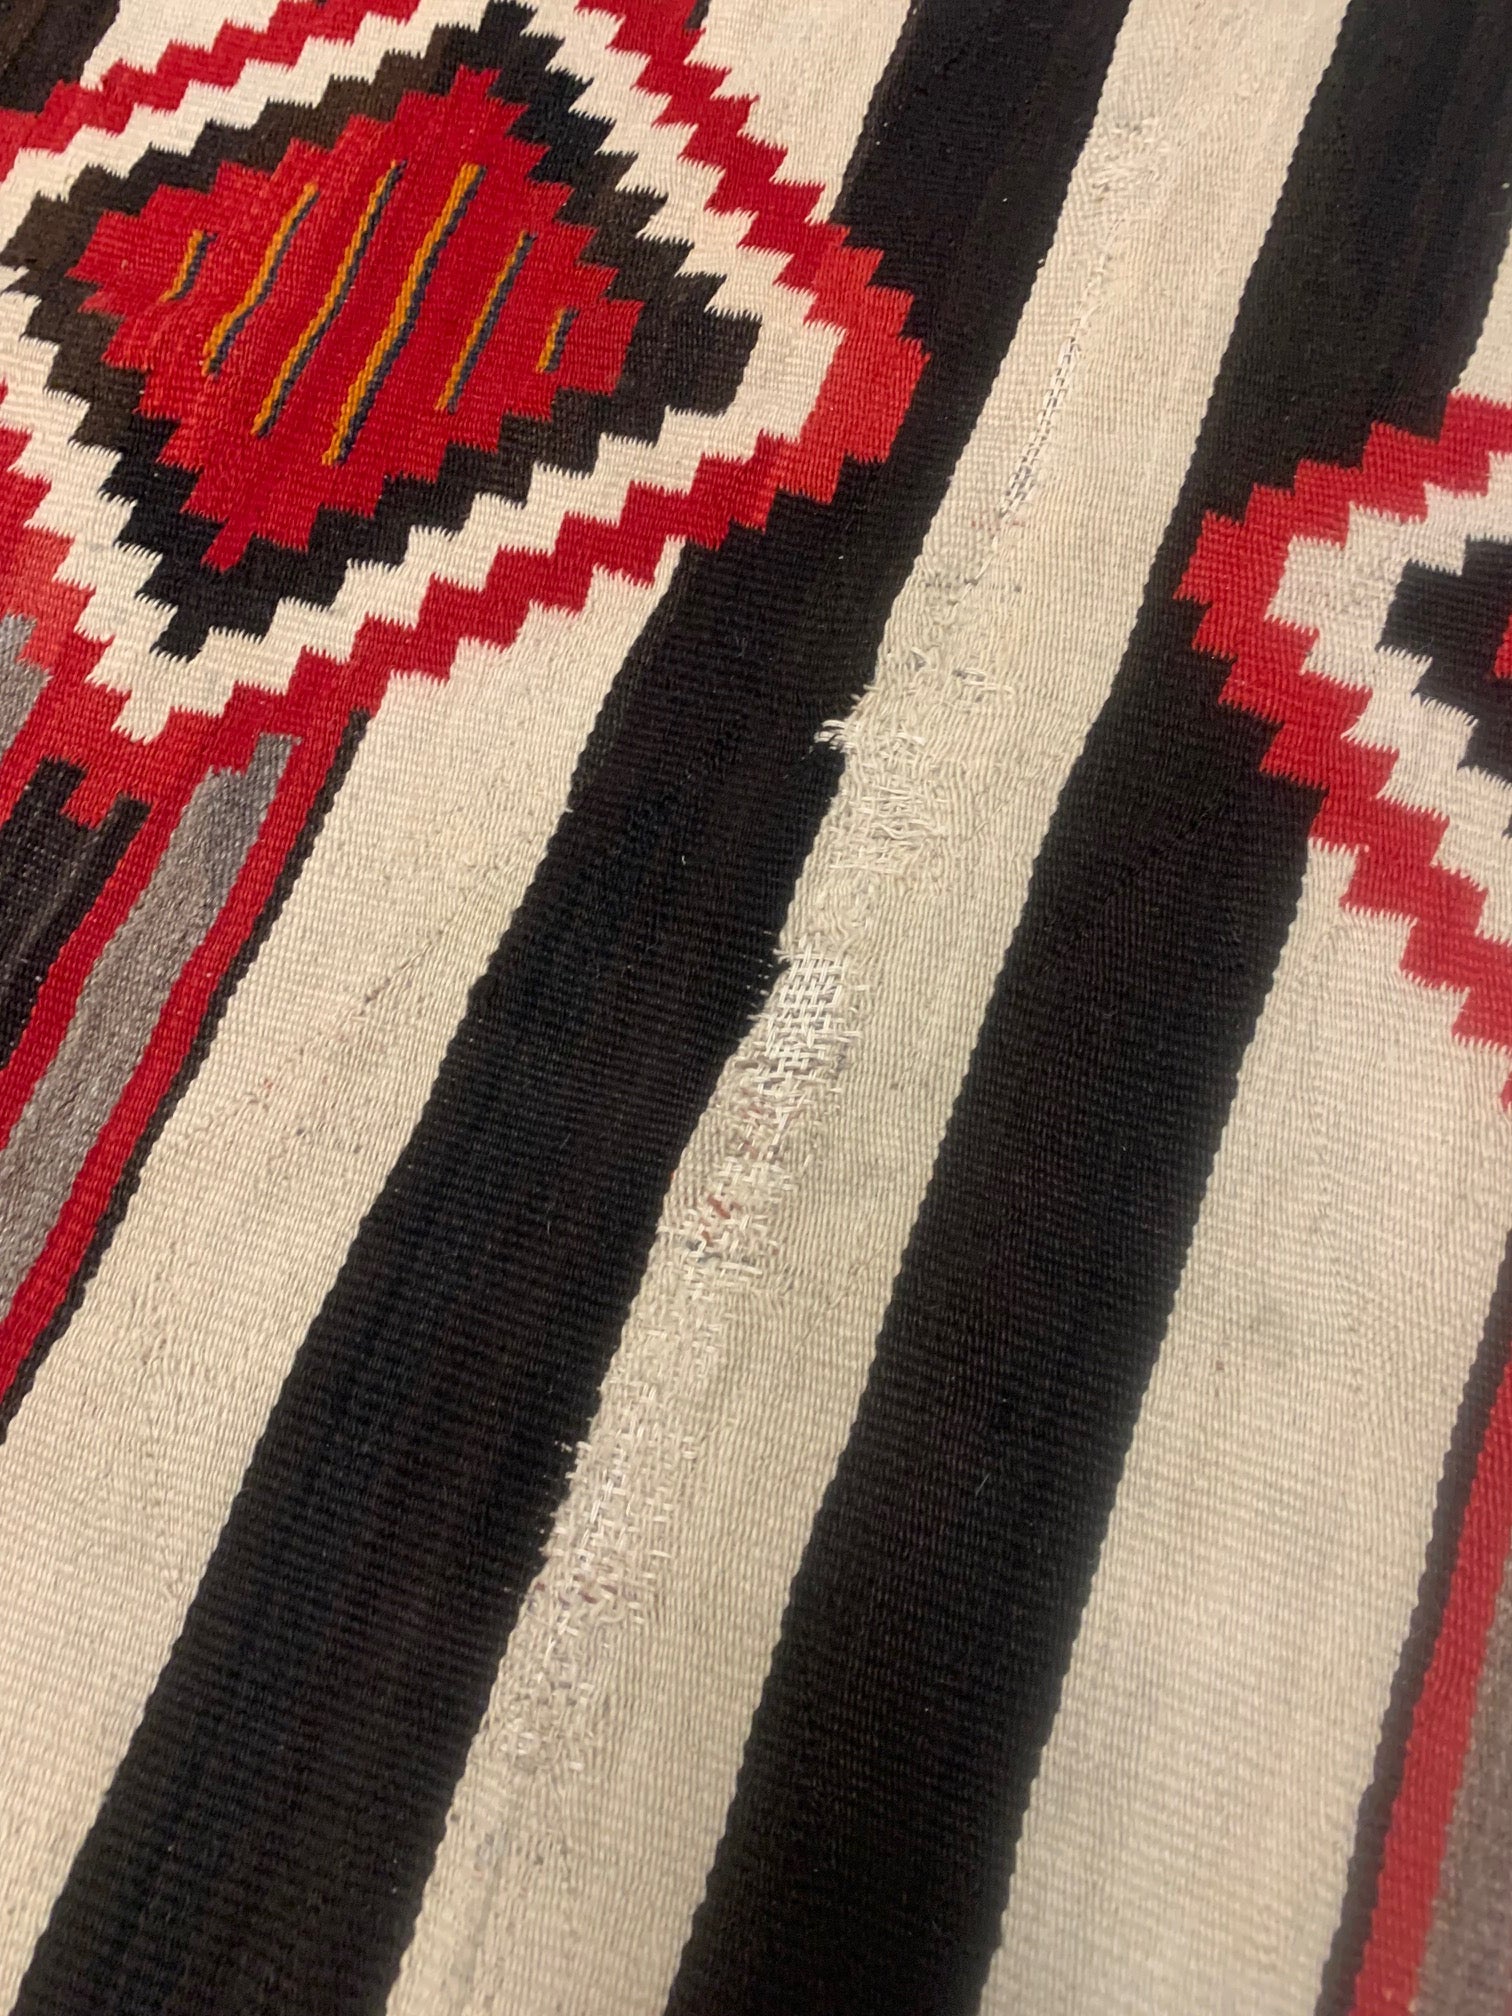 Handcrafted Geometric Patterns Evoking Cultural Significance on Vintage American Navajo Rug - 1880s